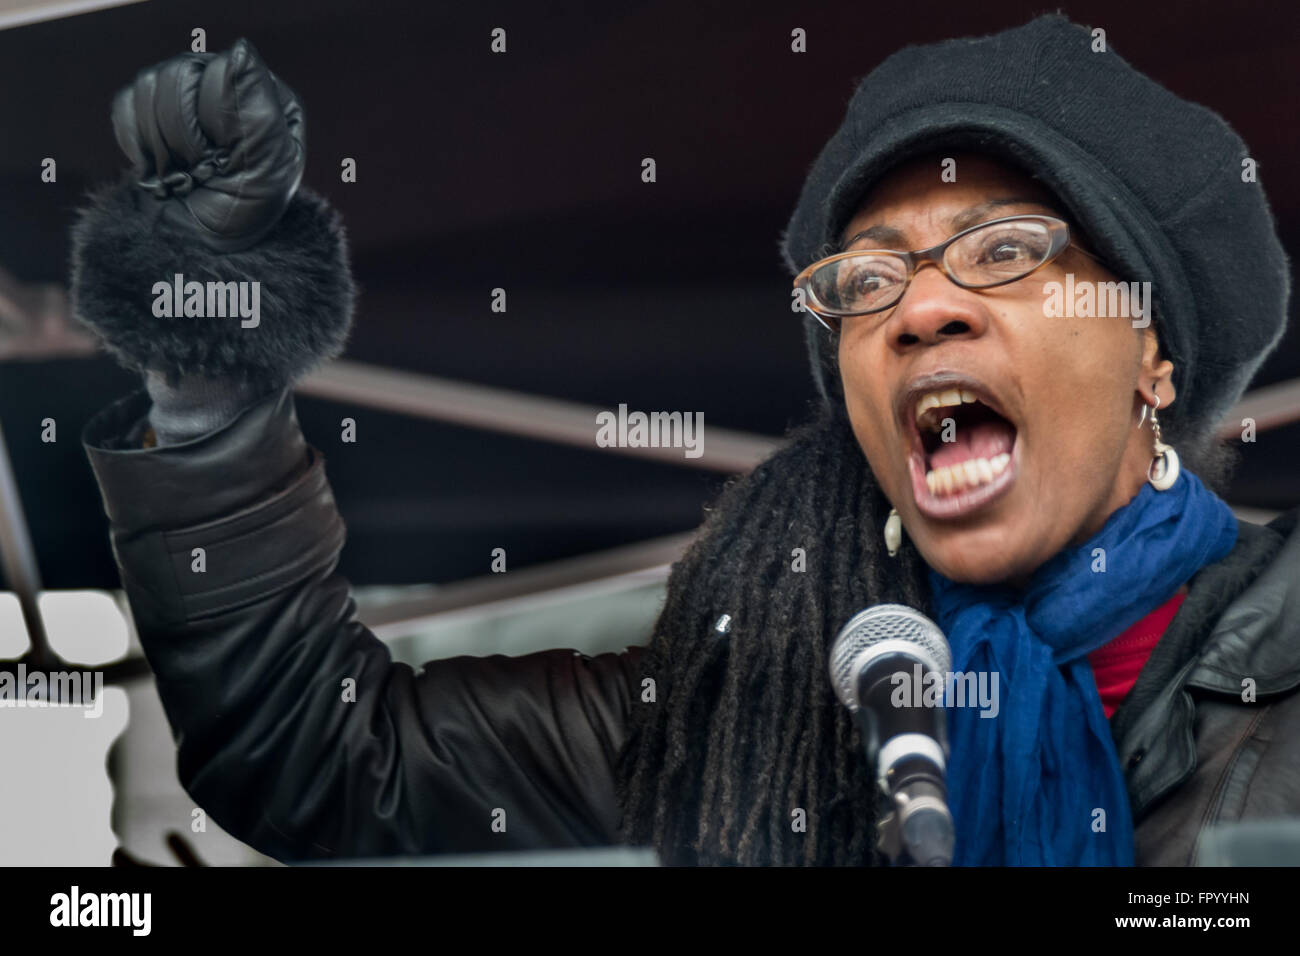 London, UK. Saturday 19th March 2016.  Marcia Rigg, who has lead the long fight to get justice for her brother Sean Rigg, killed by police at Brixton Police Station in 2008, and for other police victims with mental health problems, speaks at the Trafalgar Square 'Refugees Welcome Here' rally organised by Stand Up to Racism against racism, Islamophobia, anti-Semitism and fascism. Peter Marshall/Alamy Live News Stock Photo